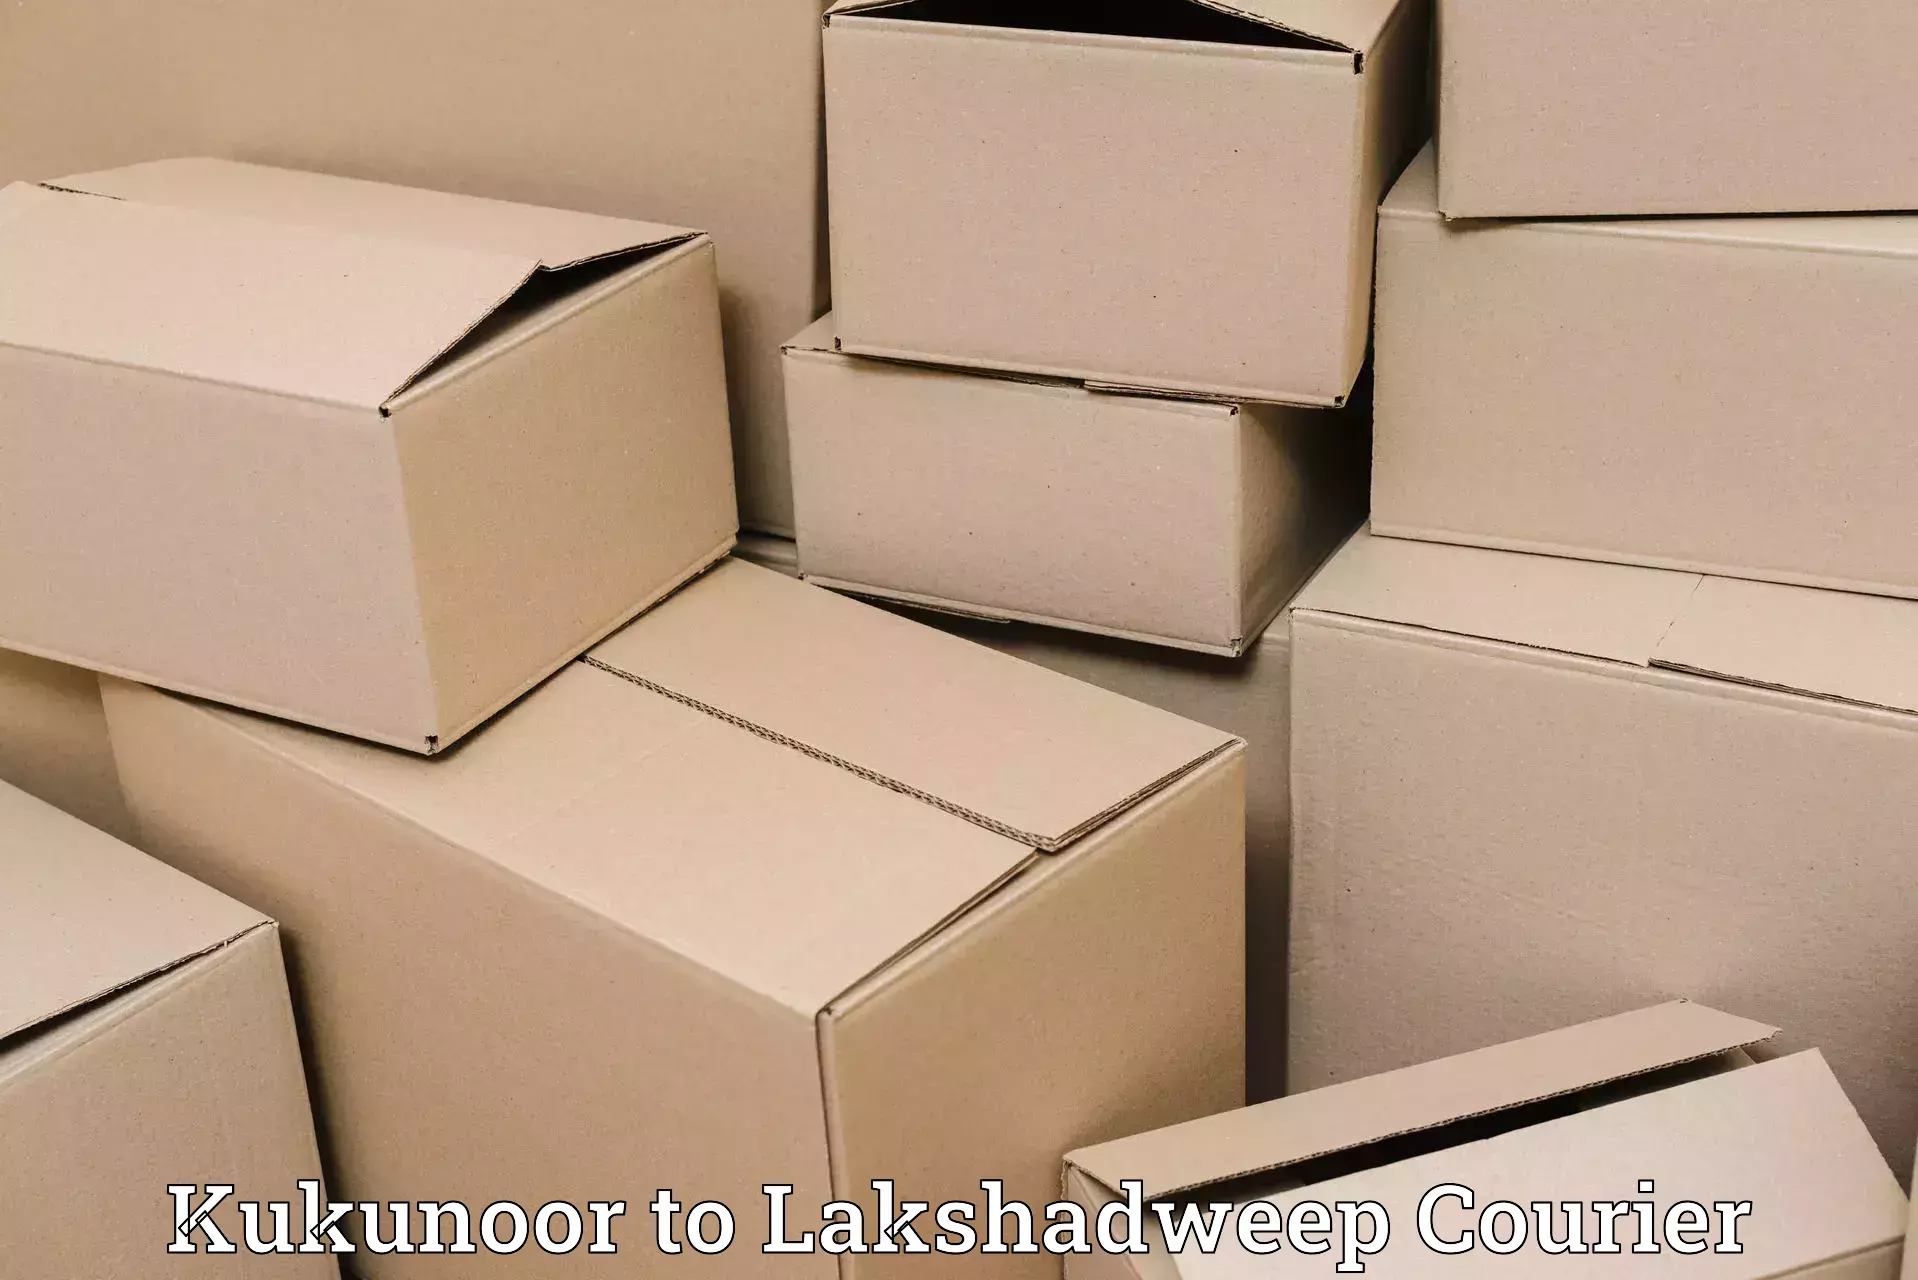 Advanced shipping network in Kukunoor to Lakshadweep